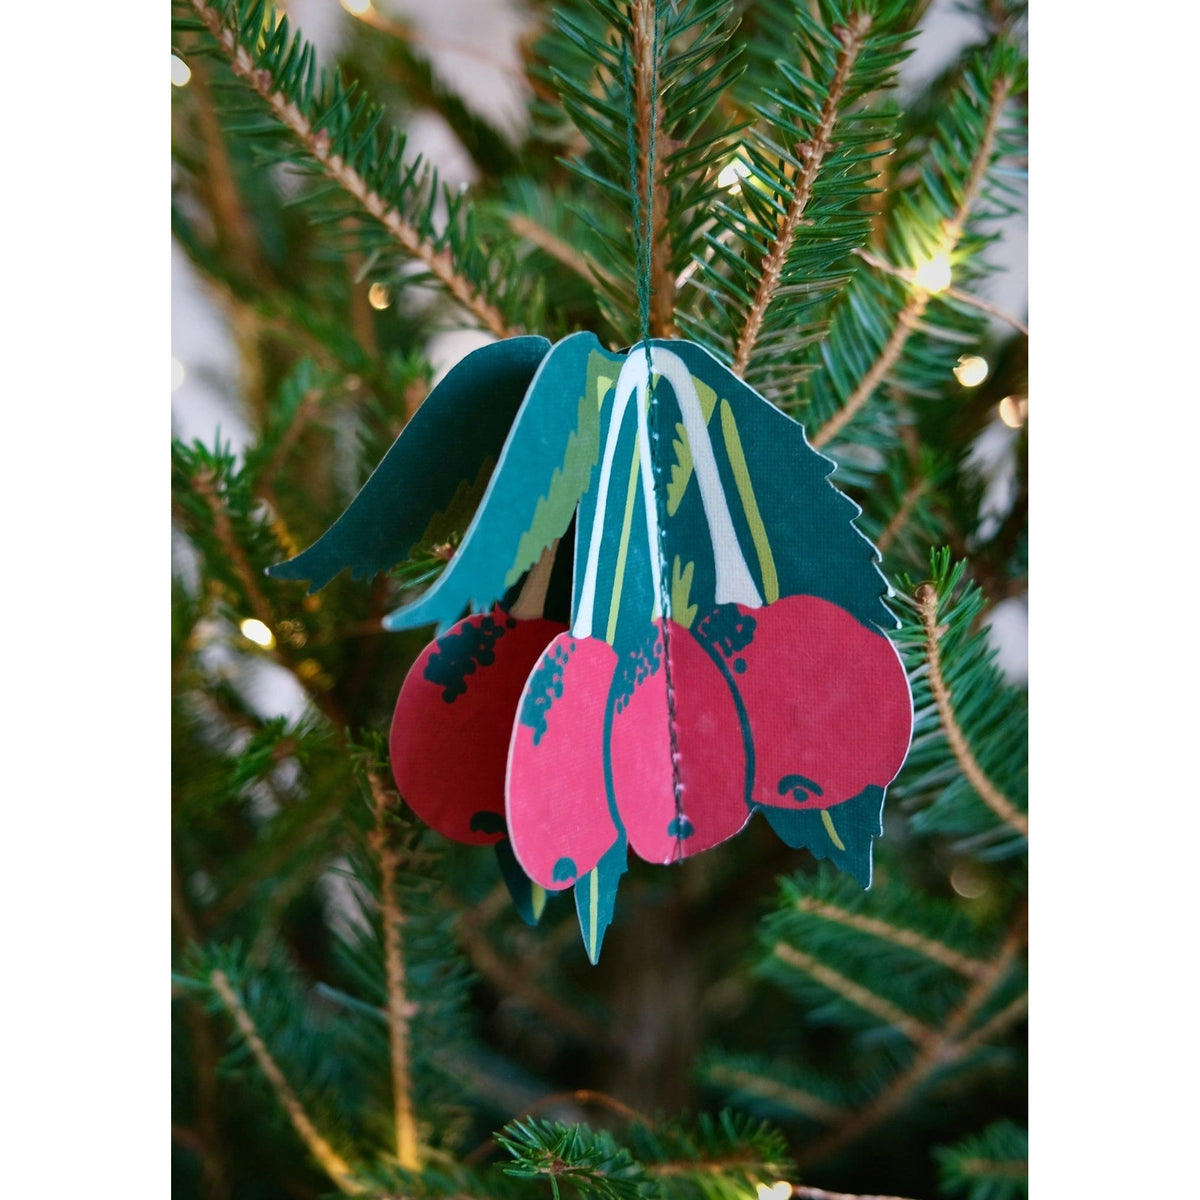 East End Press Winter Foliage Paper Decorations